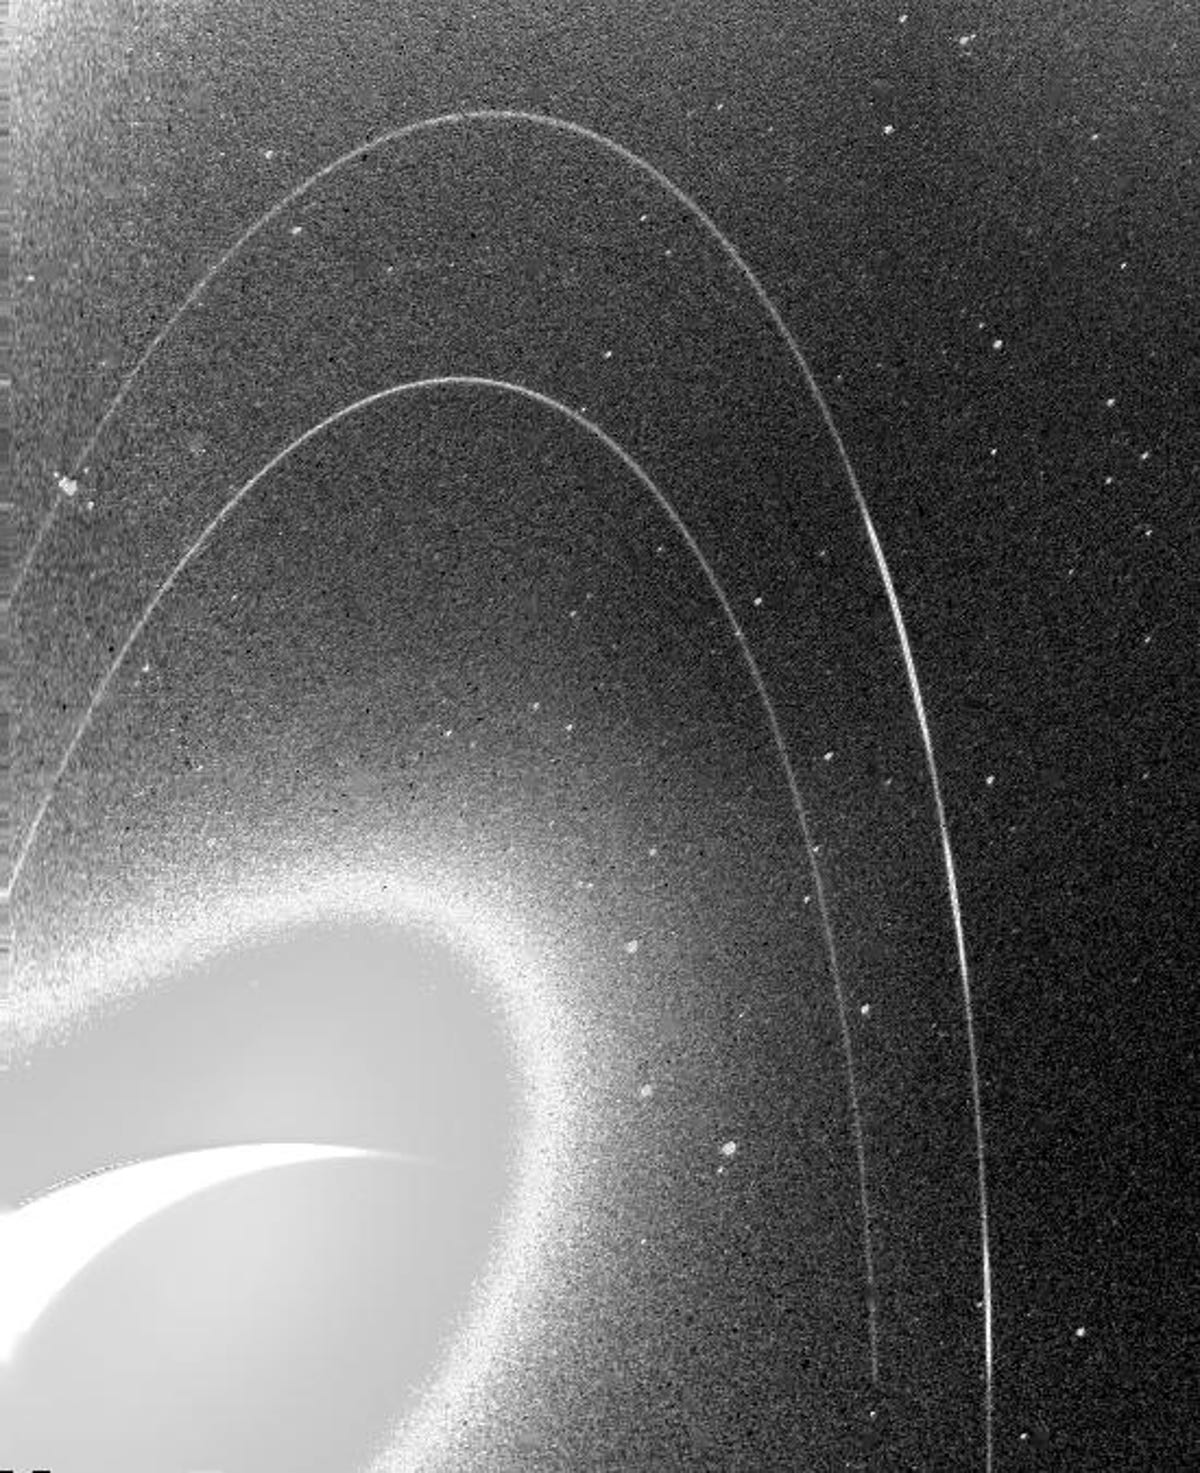 The textured, black and white image shows Neptune's faint rings.